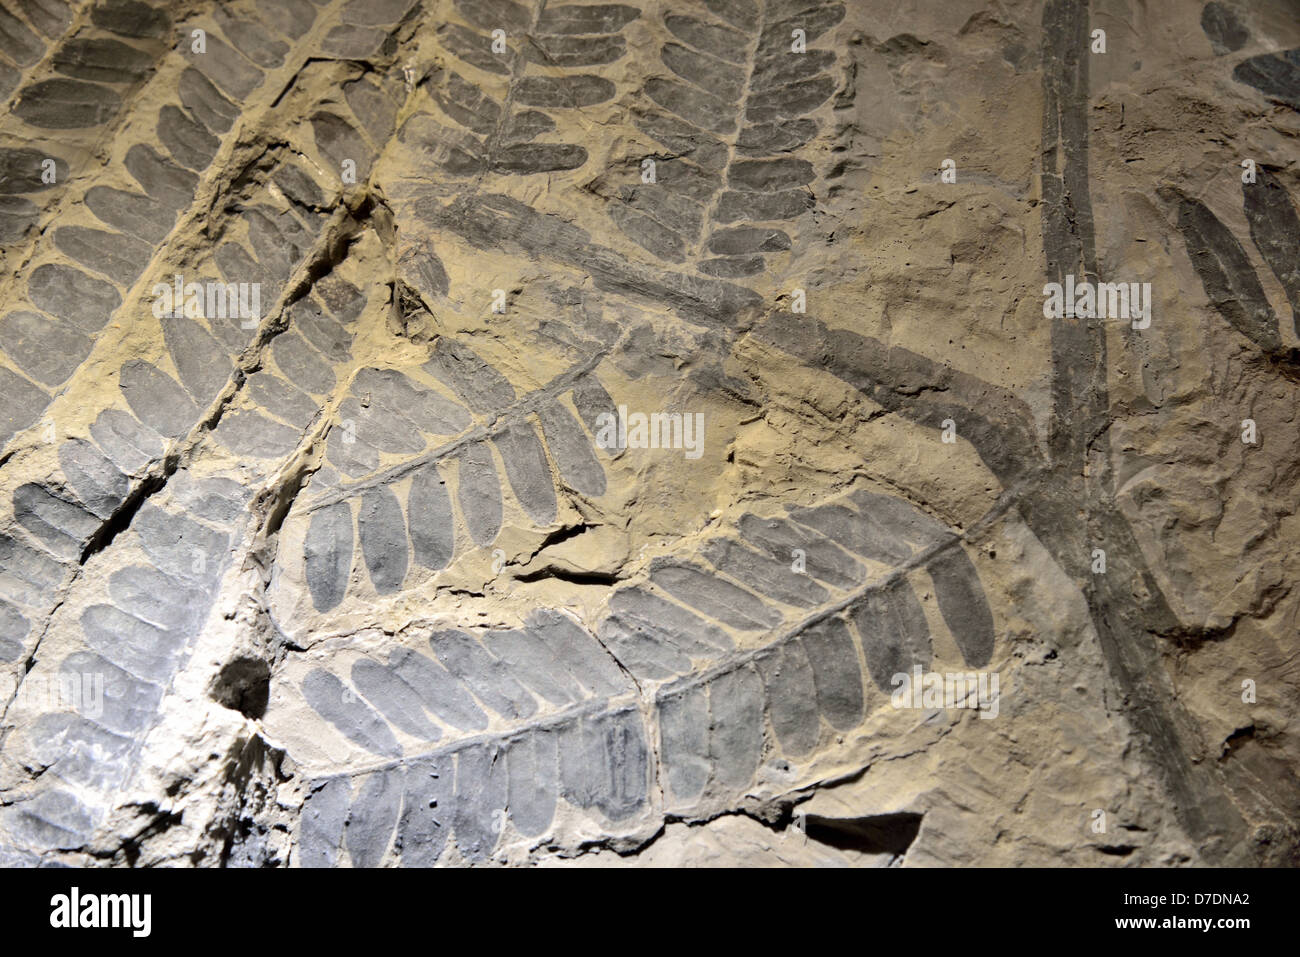 Fossil imprint of seed fern Neuropteris leaves. Carboniferous age. Stock Photo